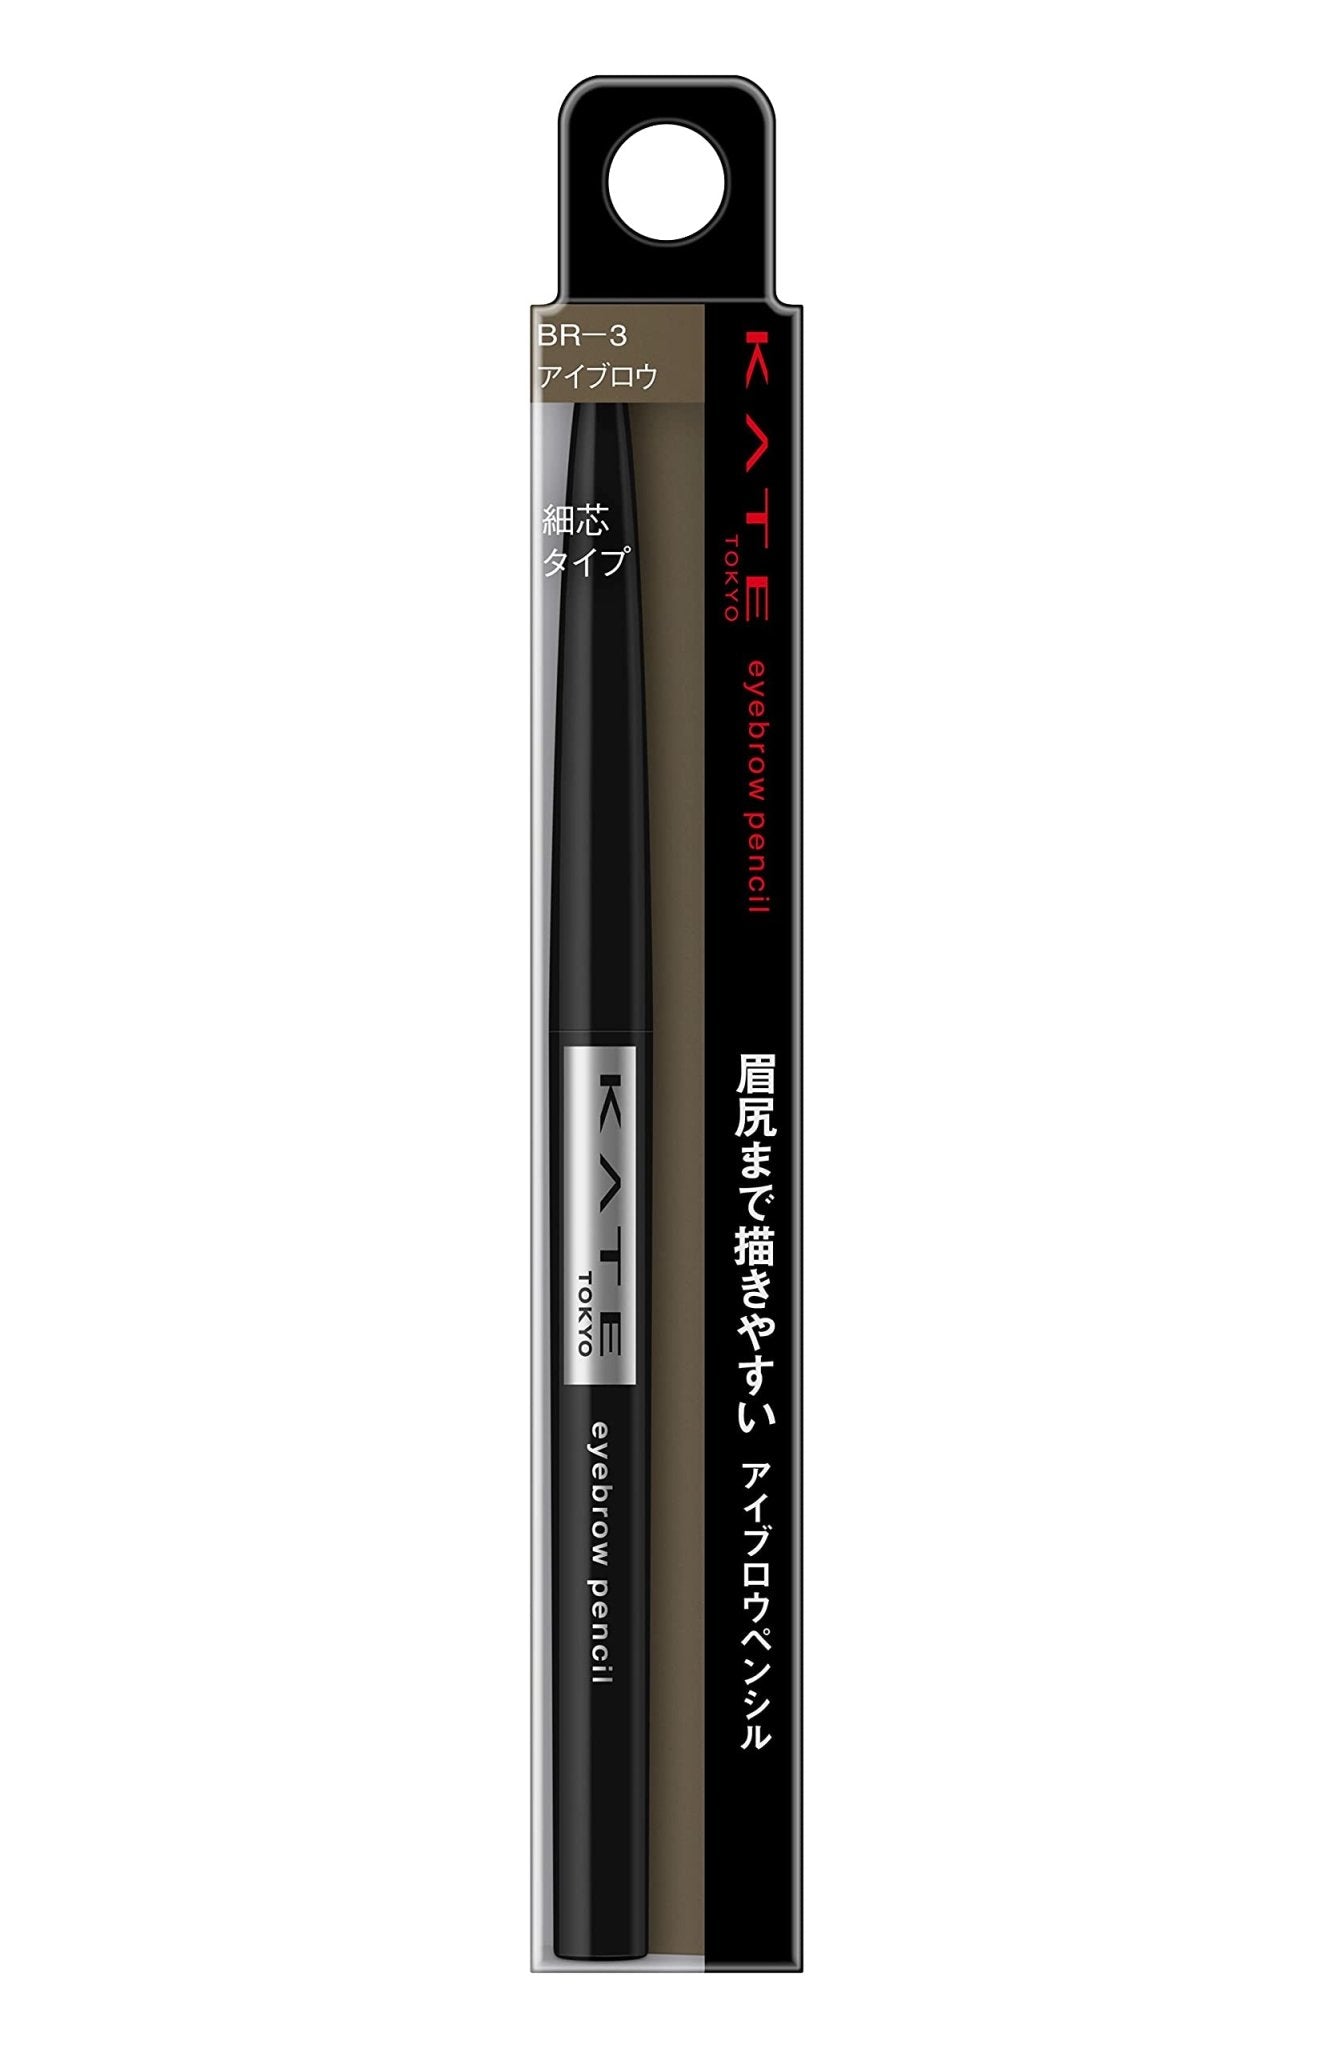 Kate Natural Brown Eyebrow Pencil BR - 3 0.07G - Single Pack